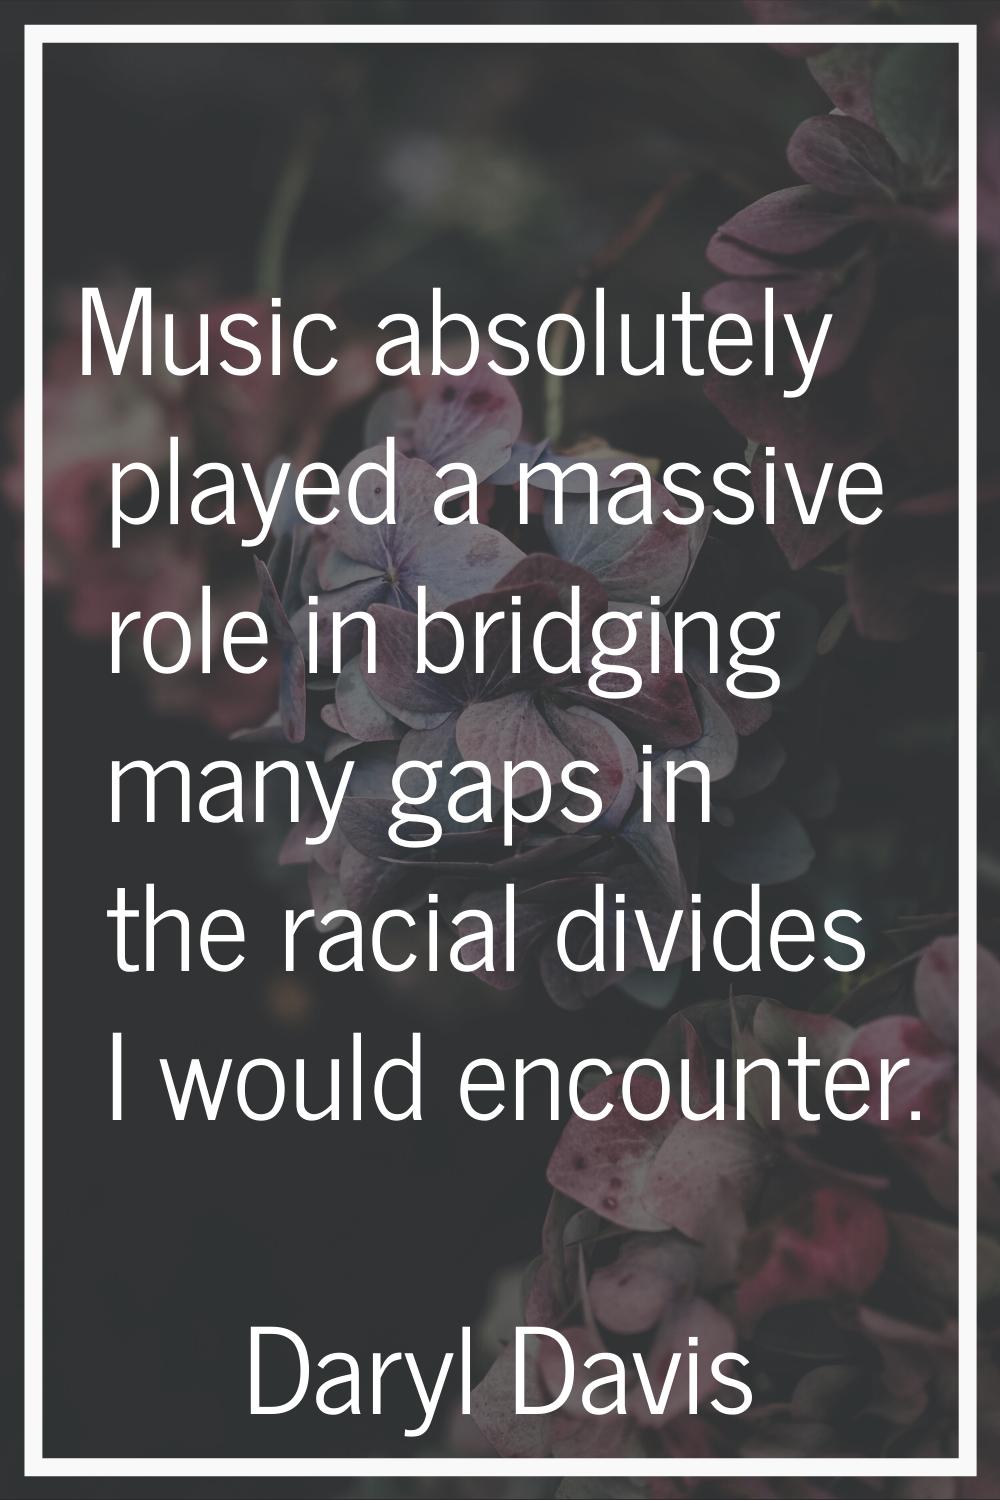 Music absolutely played a massive role in bridging many gaps in the racial divides I would encounte